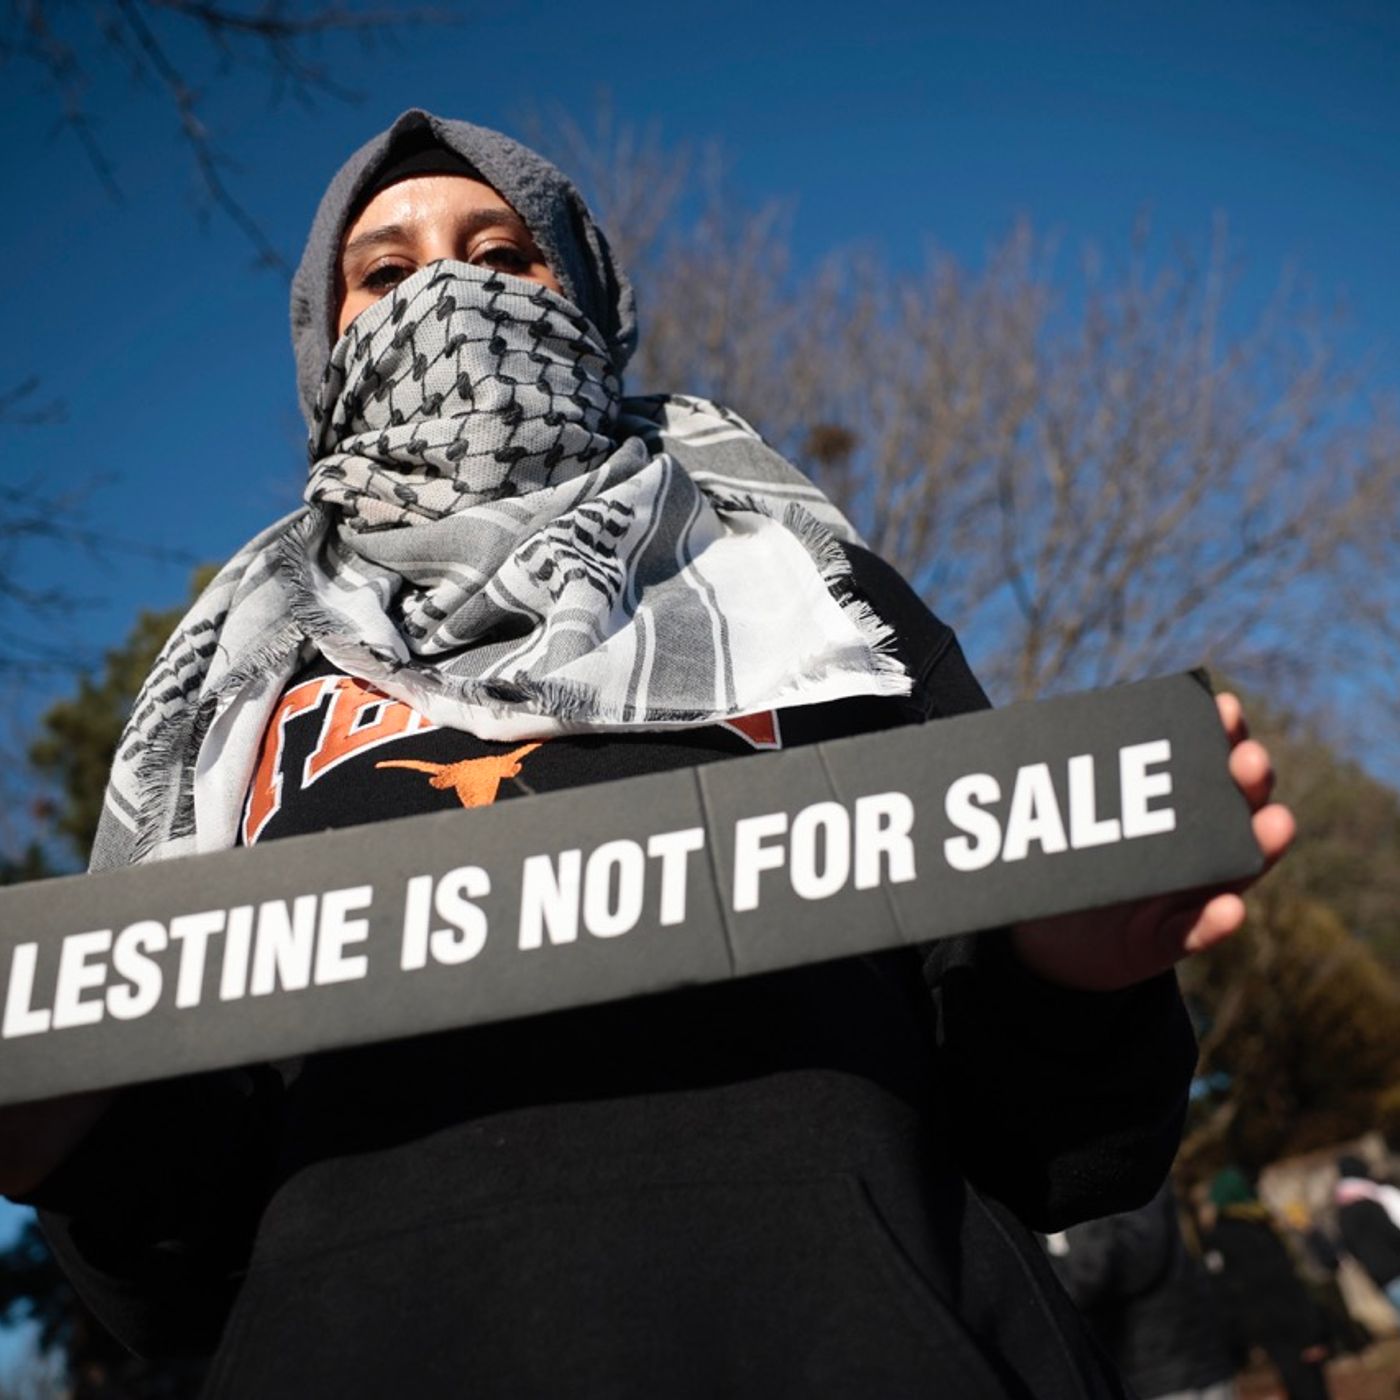 Illegal real estate sales of Palestinian land are happening around the US